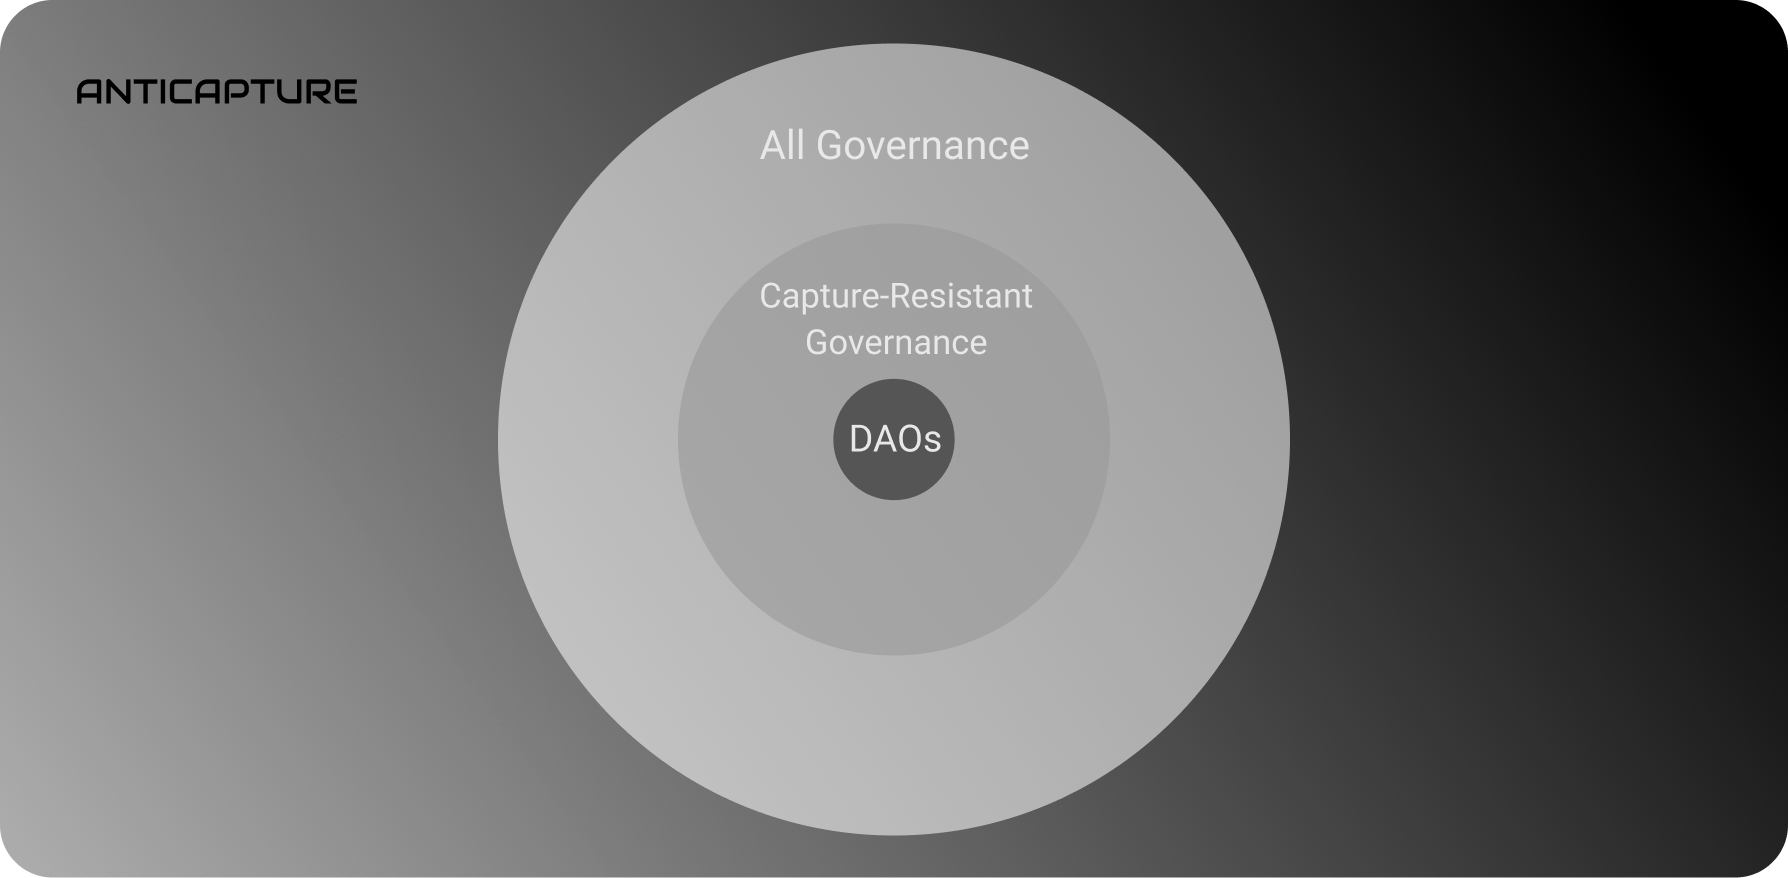 DAOs are the strongest form of capture-resistance governance